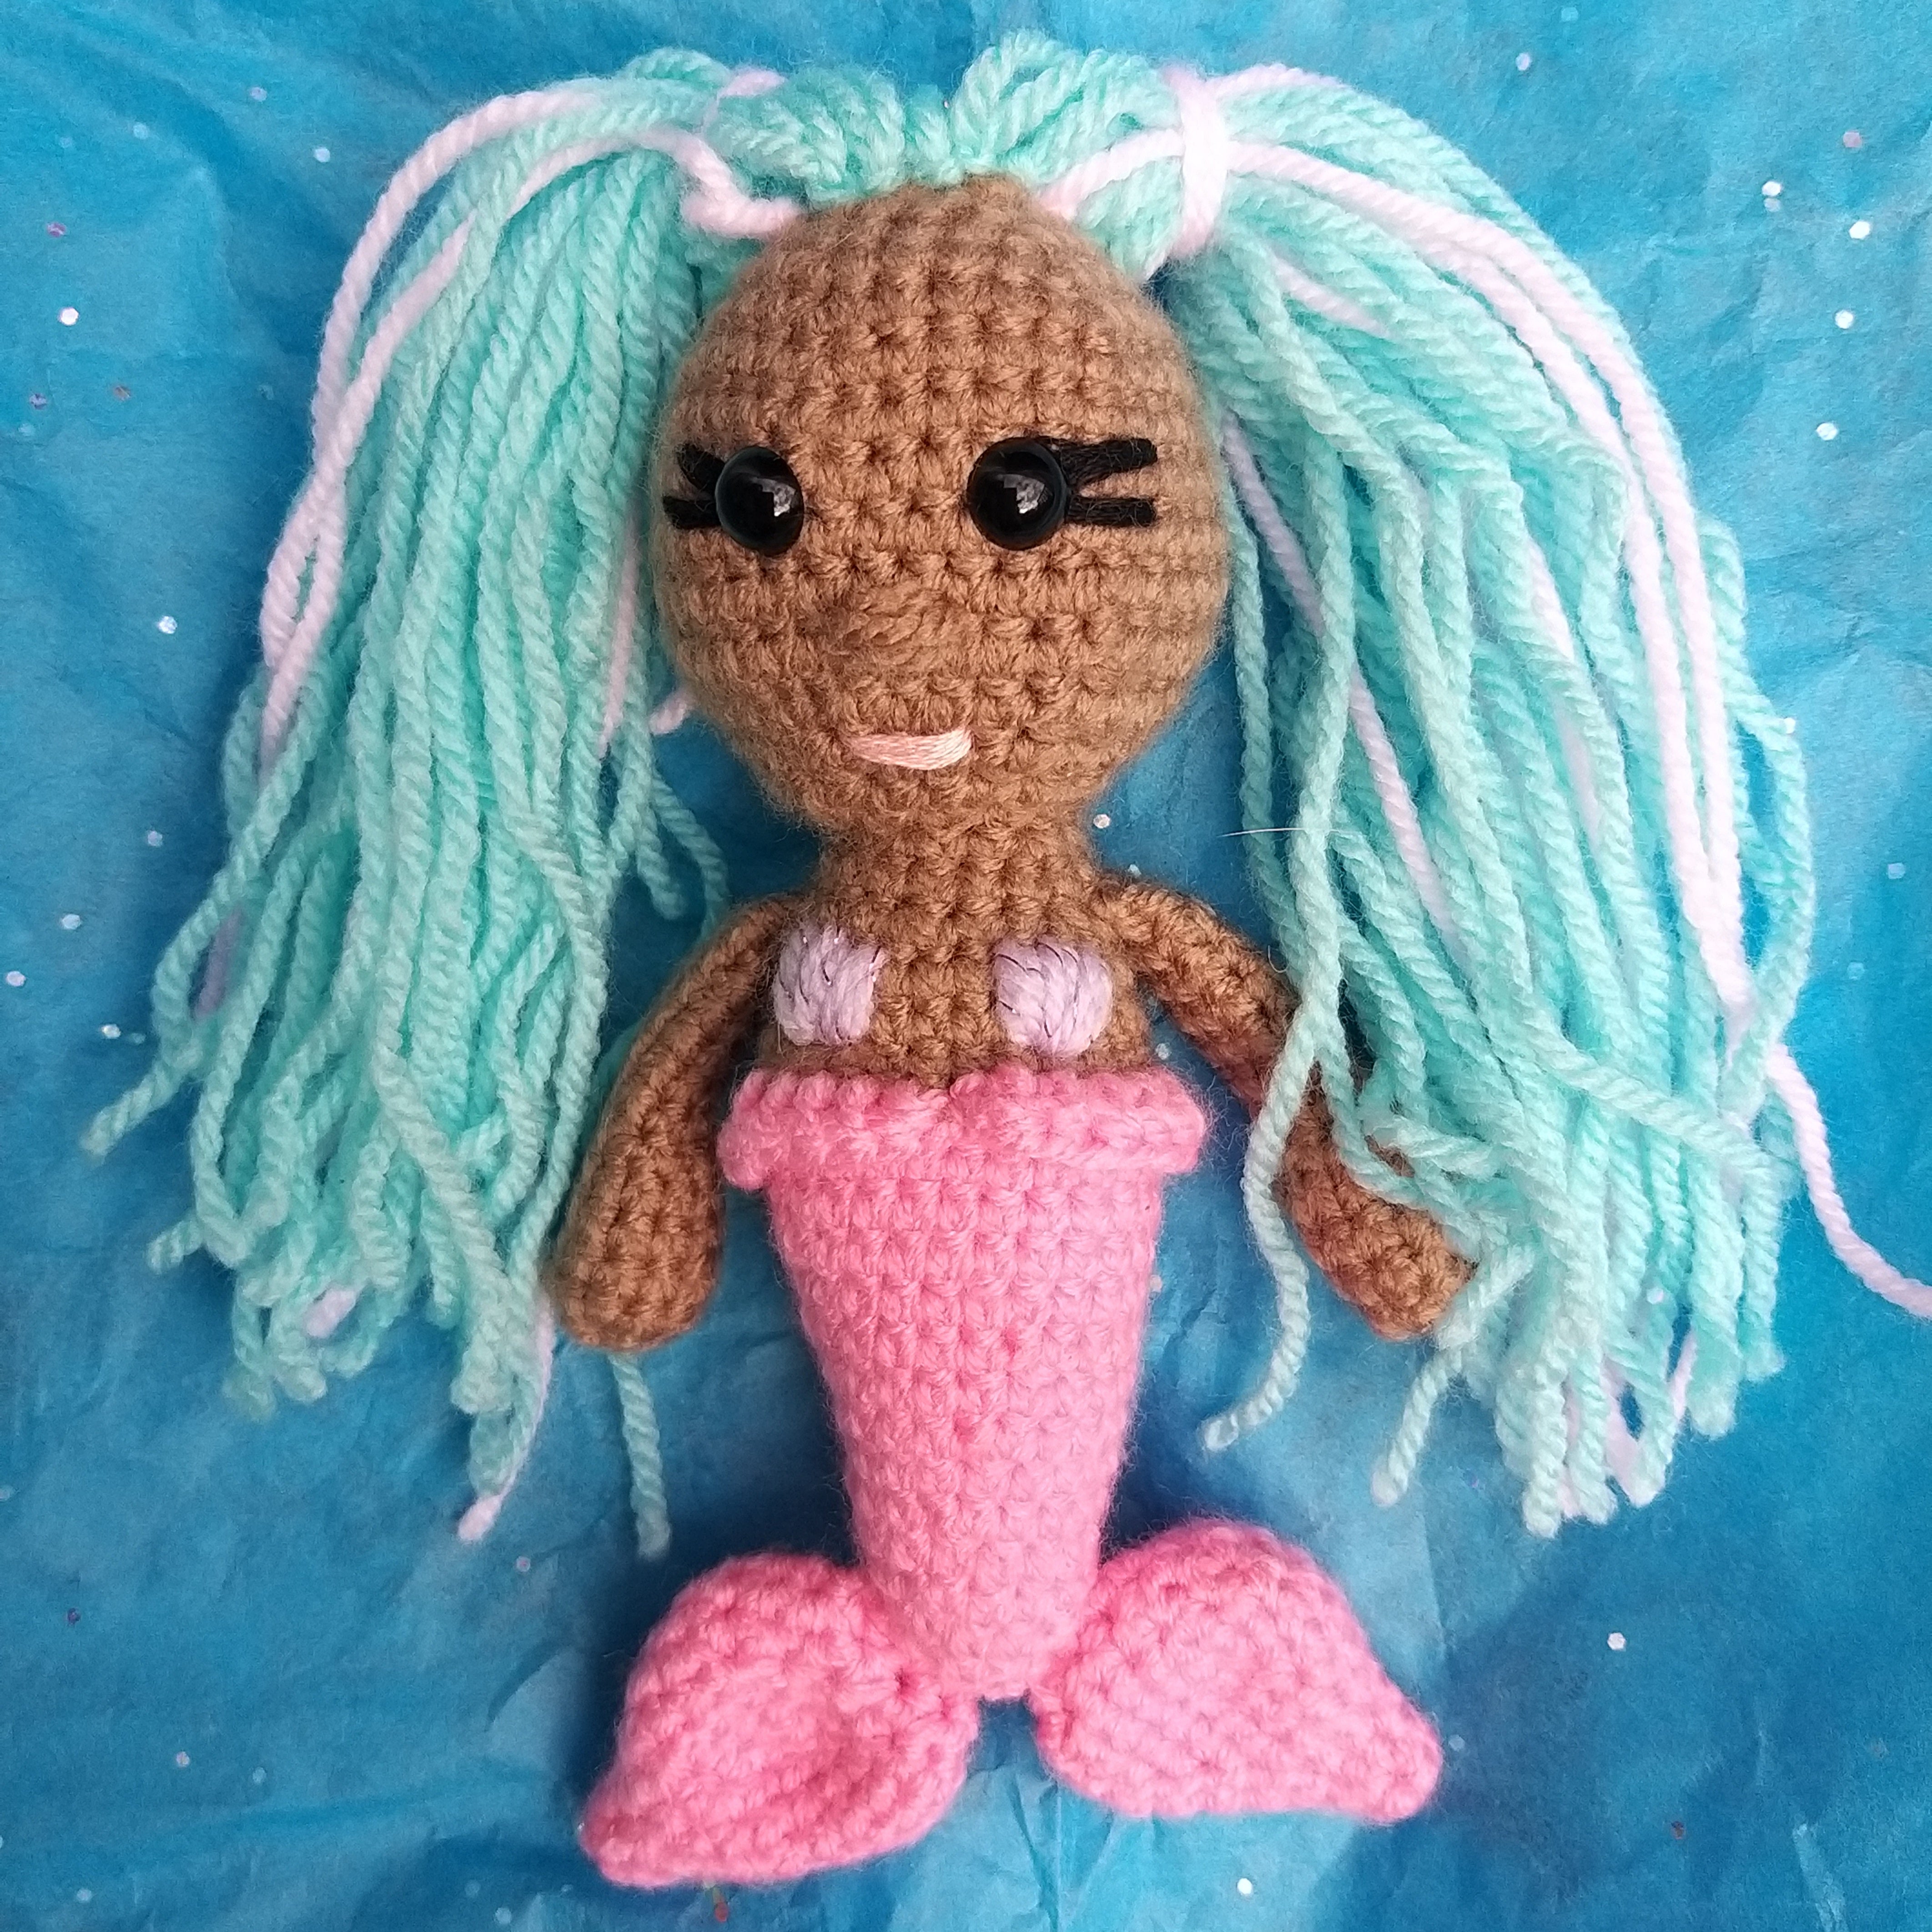 Adorable crocheted mini mermaids toy key rings in pink and teal with hair you can style, varying colored hair, skin and mermaid tails. Mini Mermaid Tails